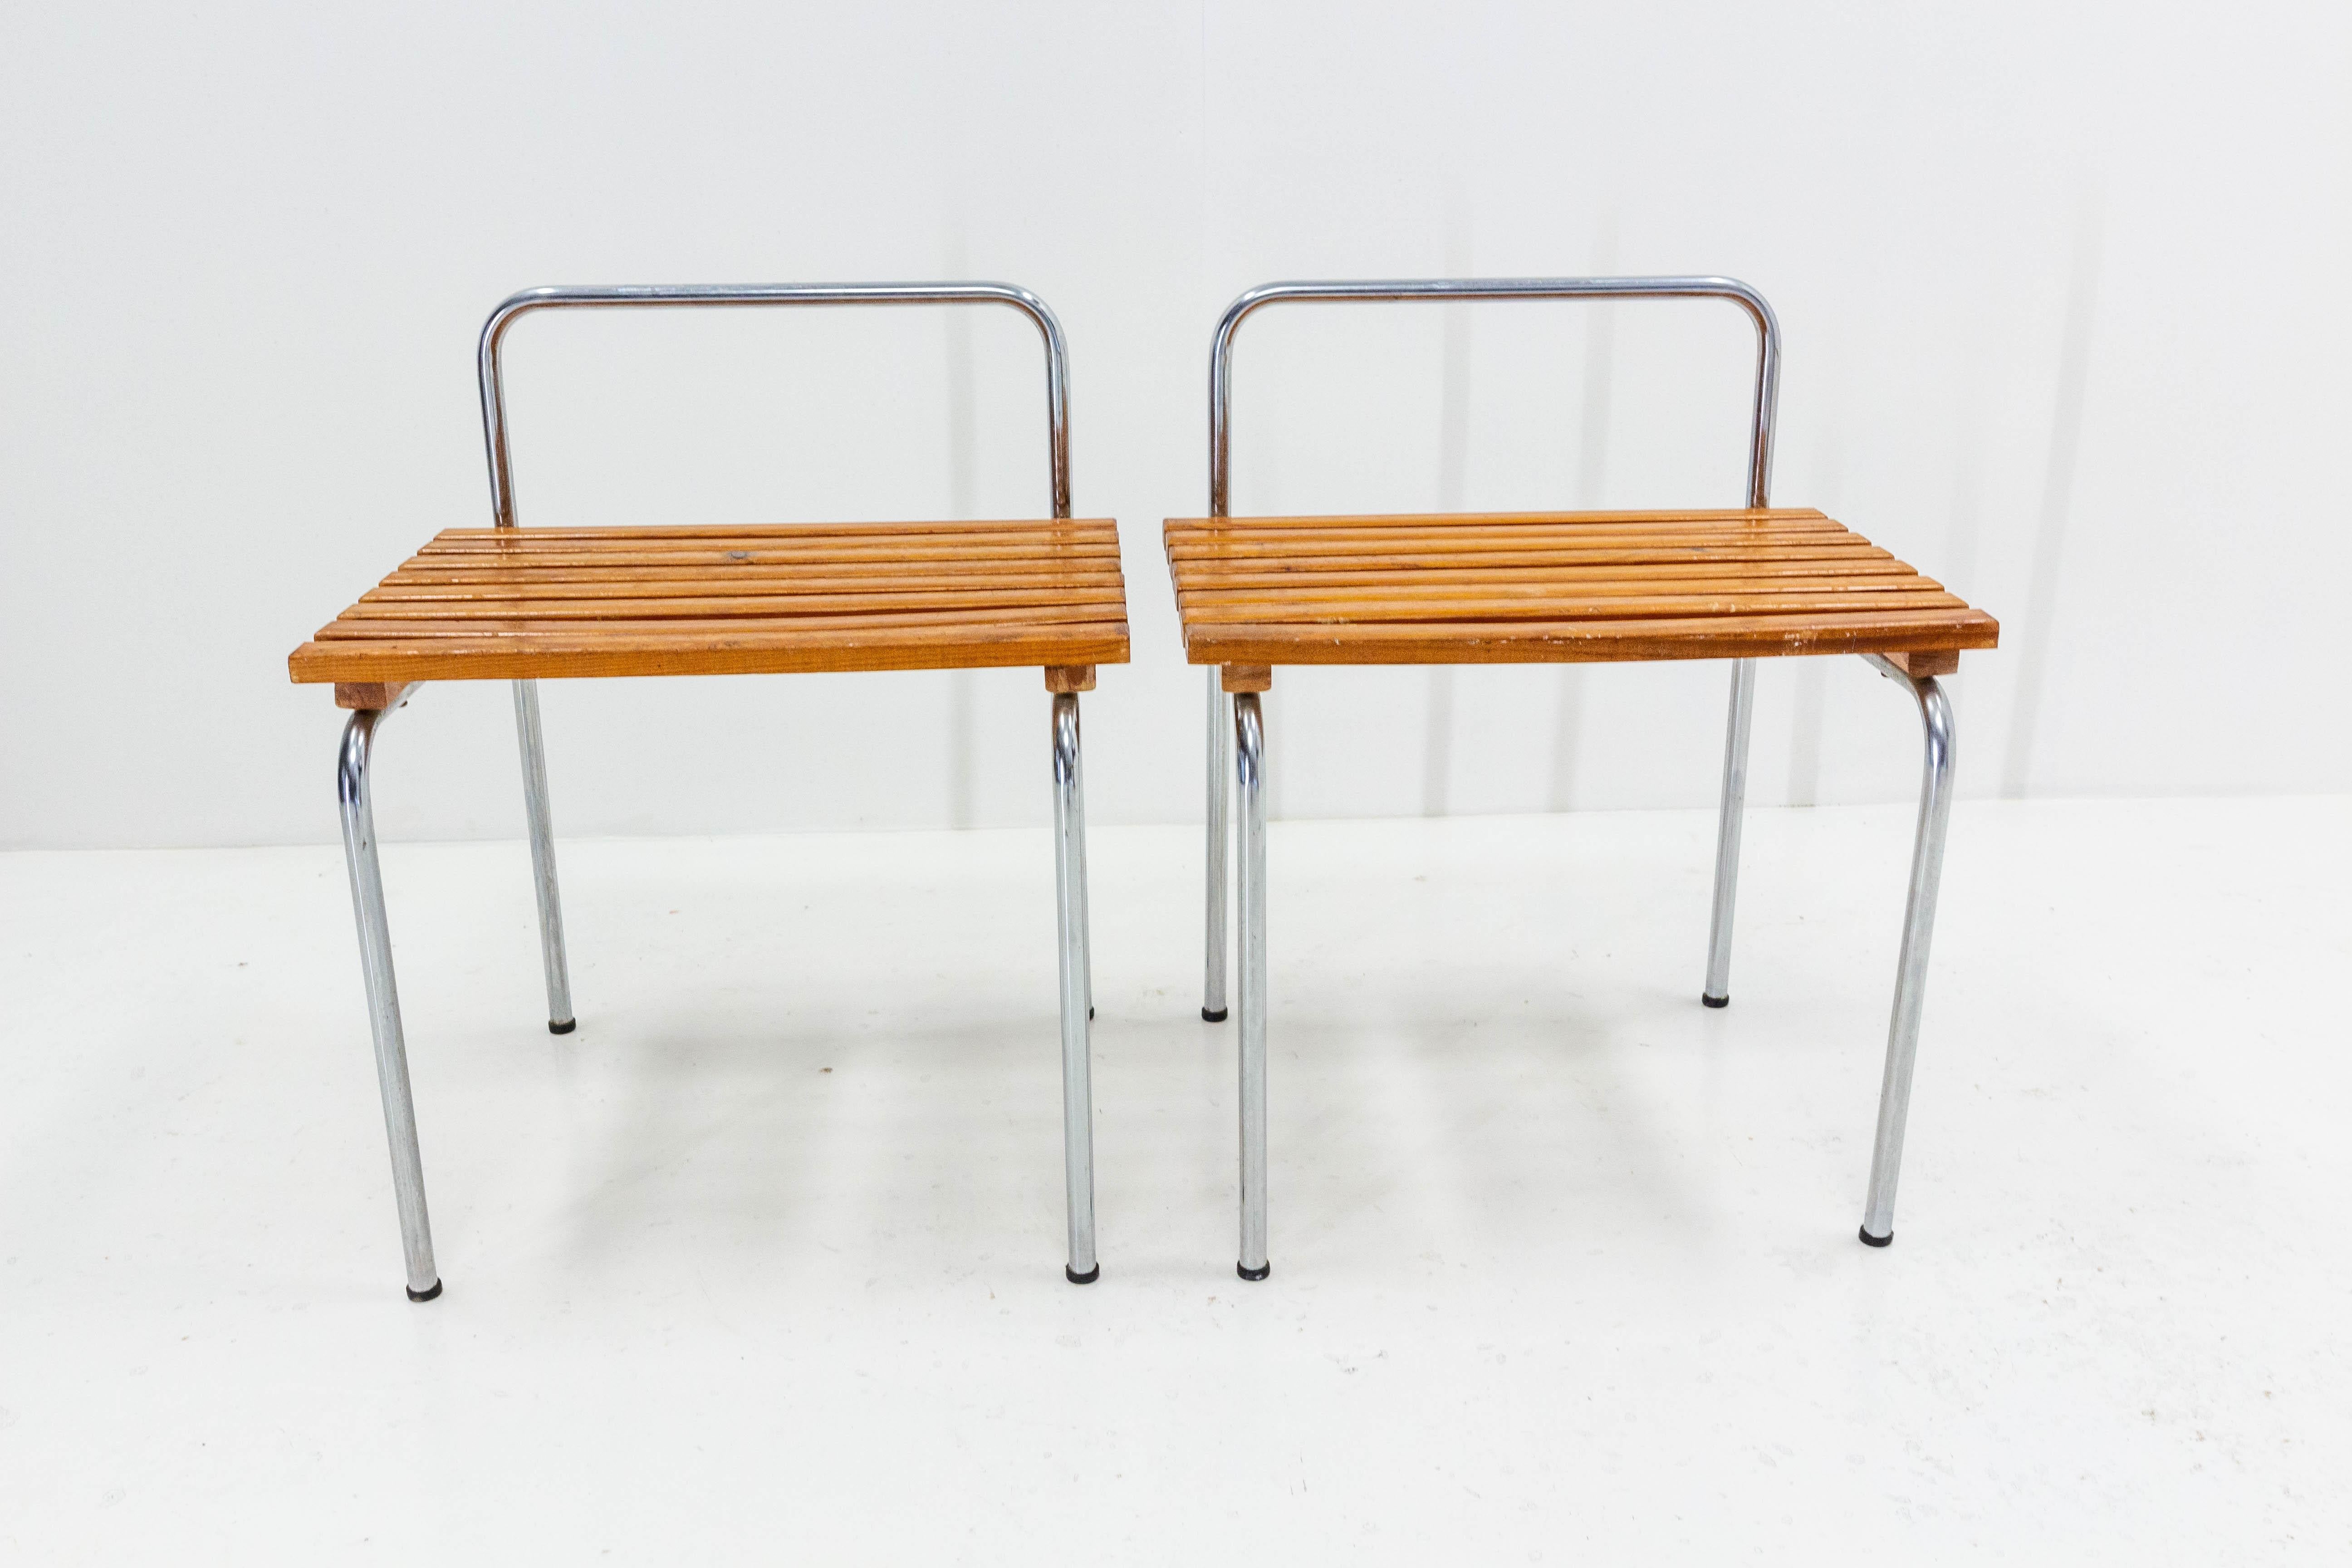 Luggage rack made by Charlotte Perriand, circa 1968 for the ski resort Les Arcs. Support formed by wooden slats, resting on a chromed metal structure.


Lot 2
Shipping: 64/51/41 
Eooden case 68 45 55 cm Kg 18.
  